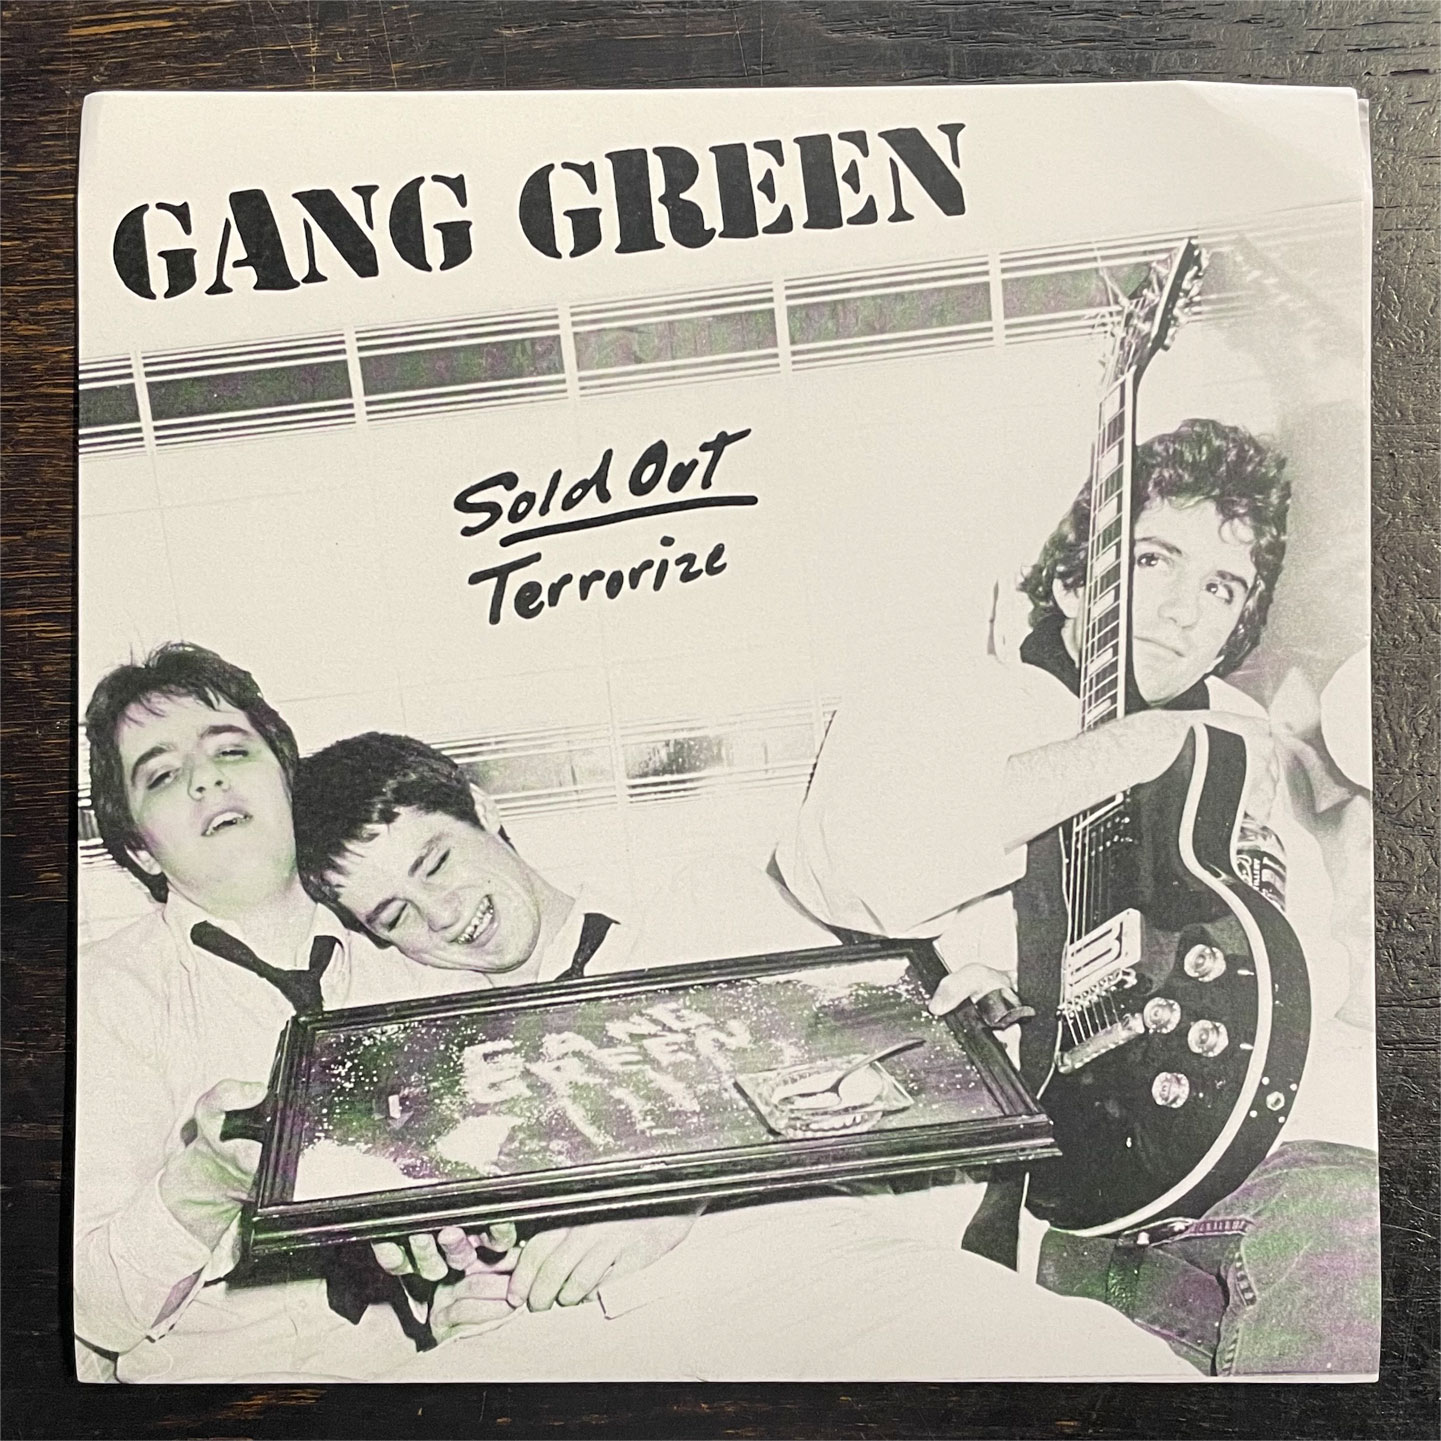 Gang Green 7" EP SOLD OUT